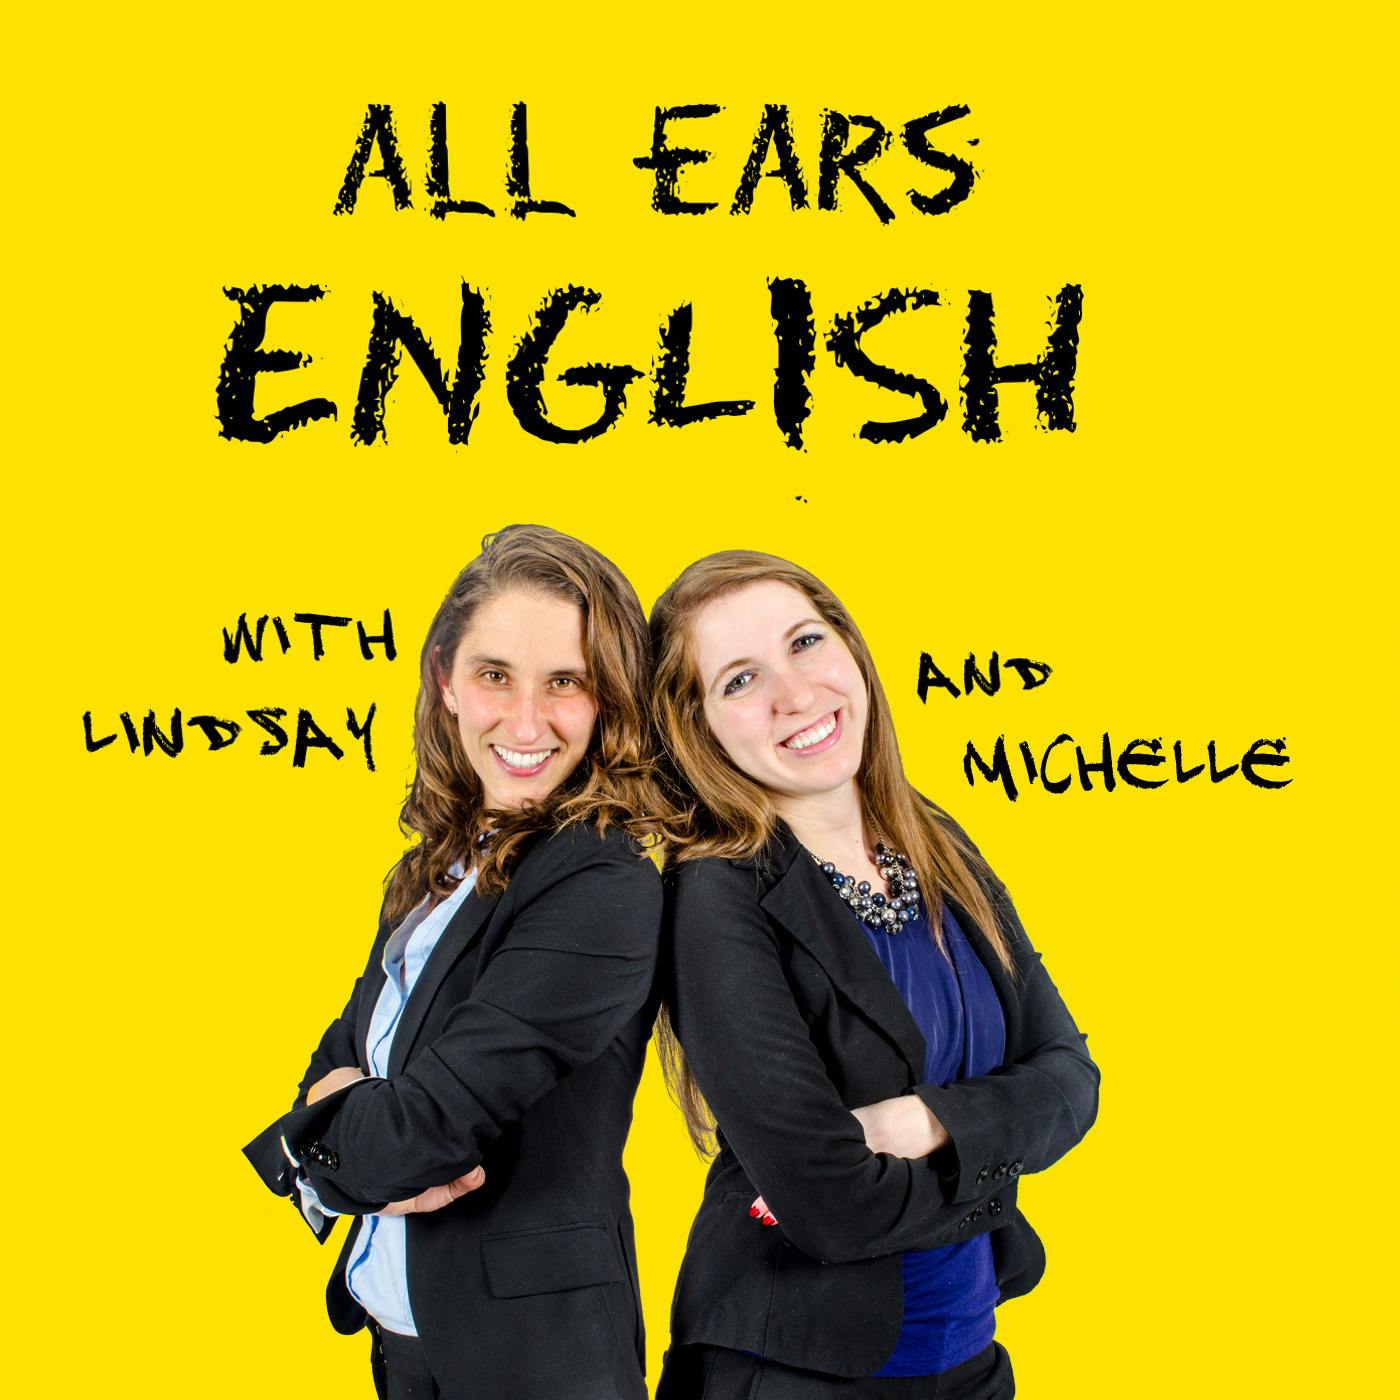 AEE 1319: Connect When You Wouldn't Expect It! Tips for Practicing Your English